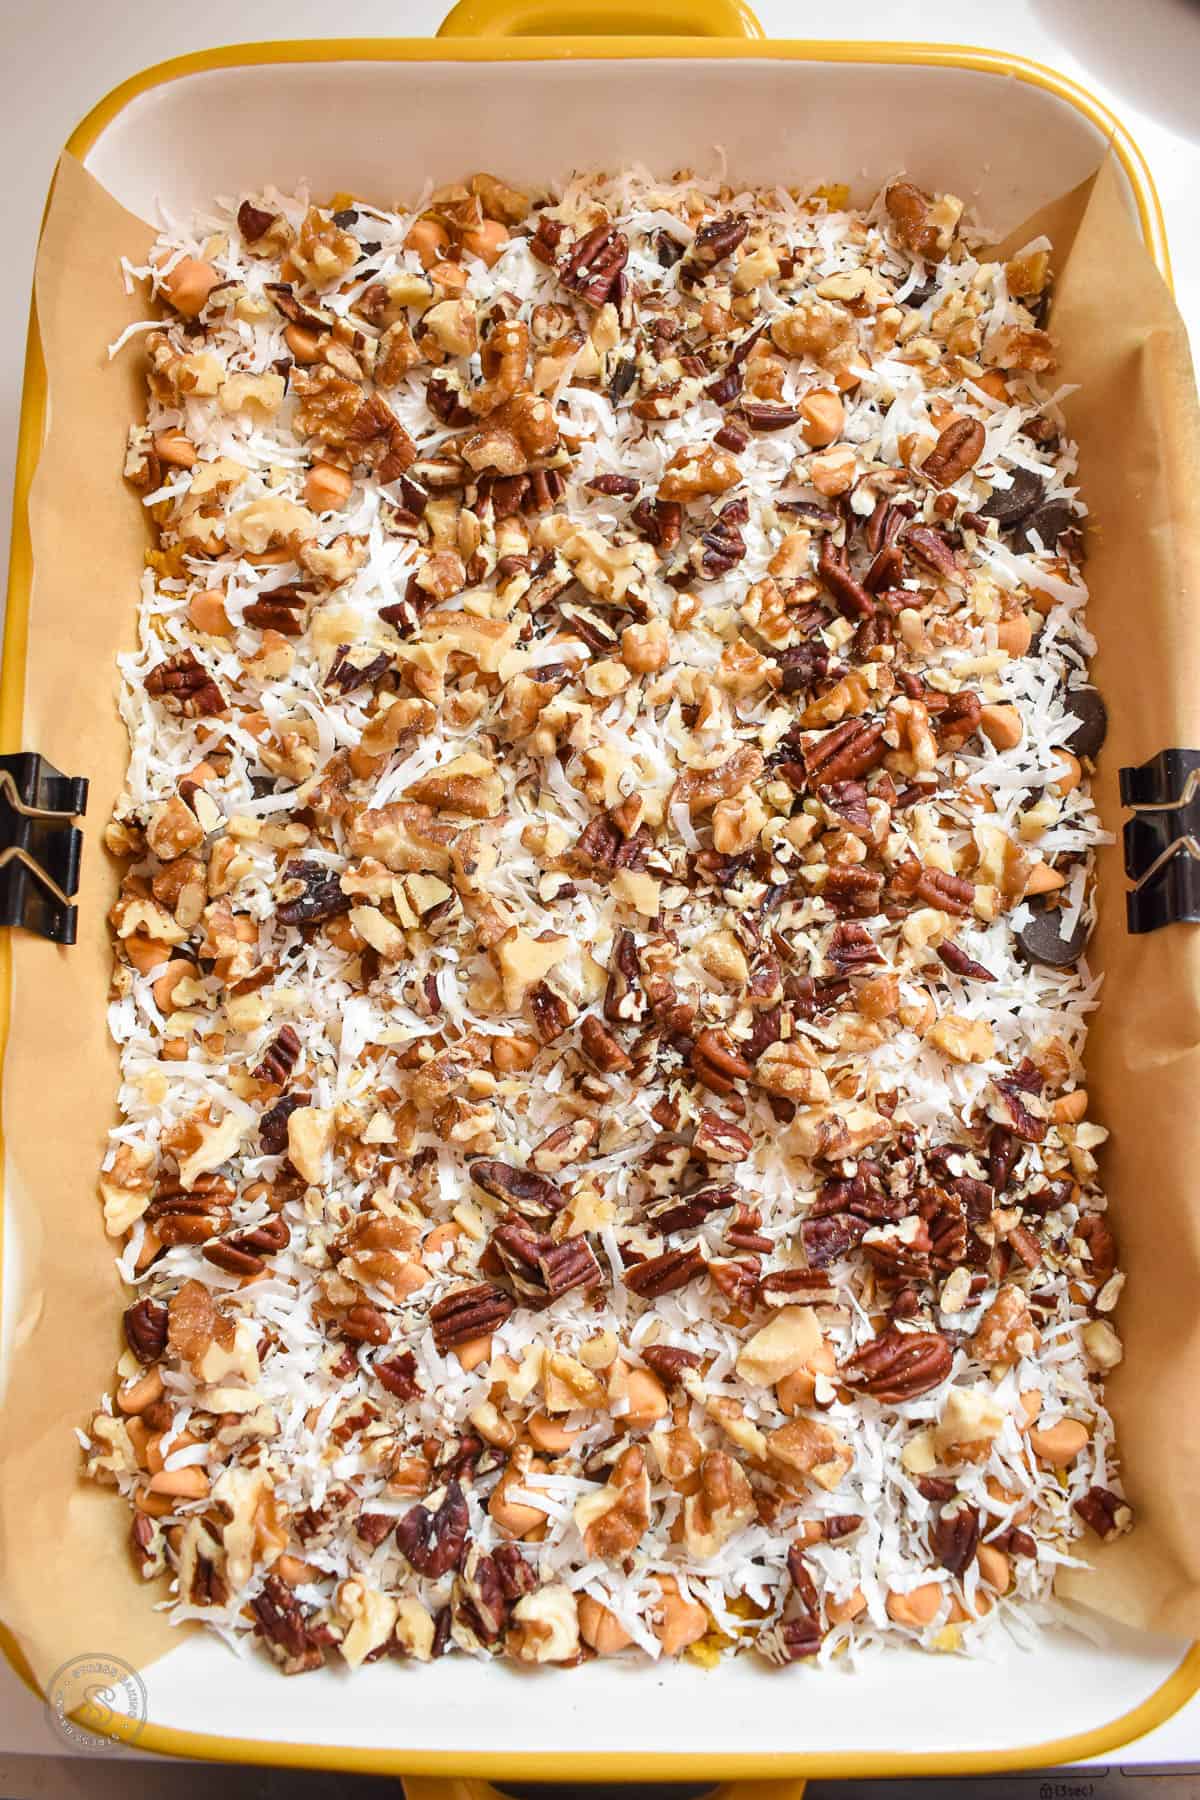 Chopped walnuts and pecans on top of shredded coconut in a baking dish